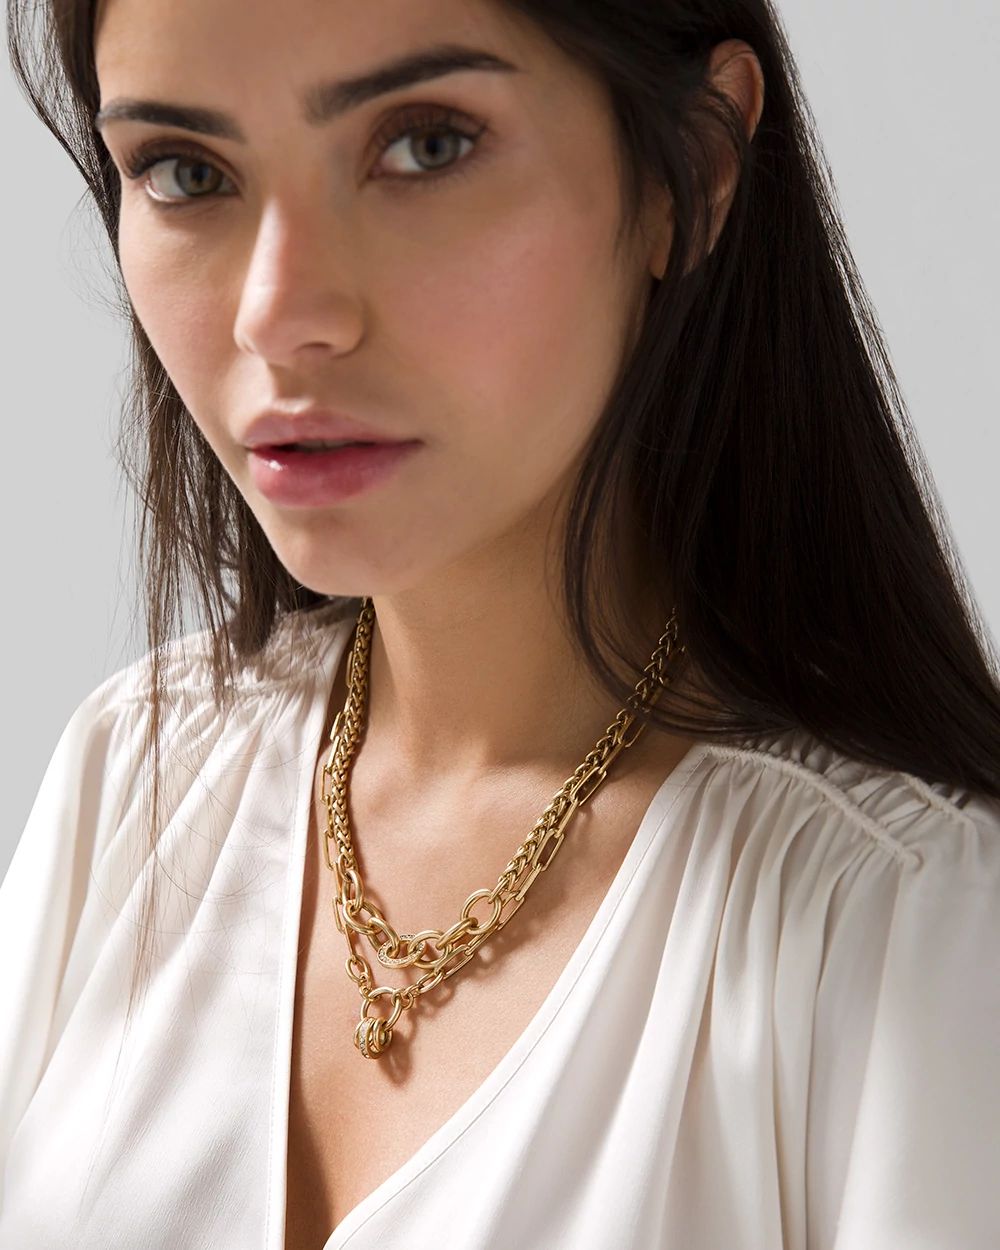 Goldtone Multi-Strand Chain Necklace click to view larger image.